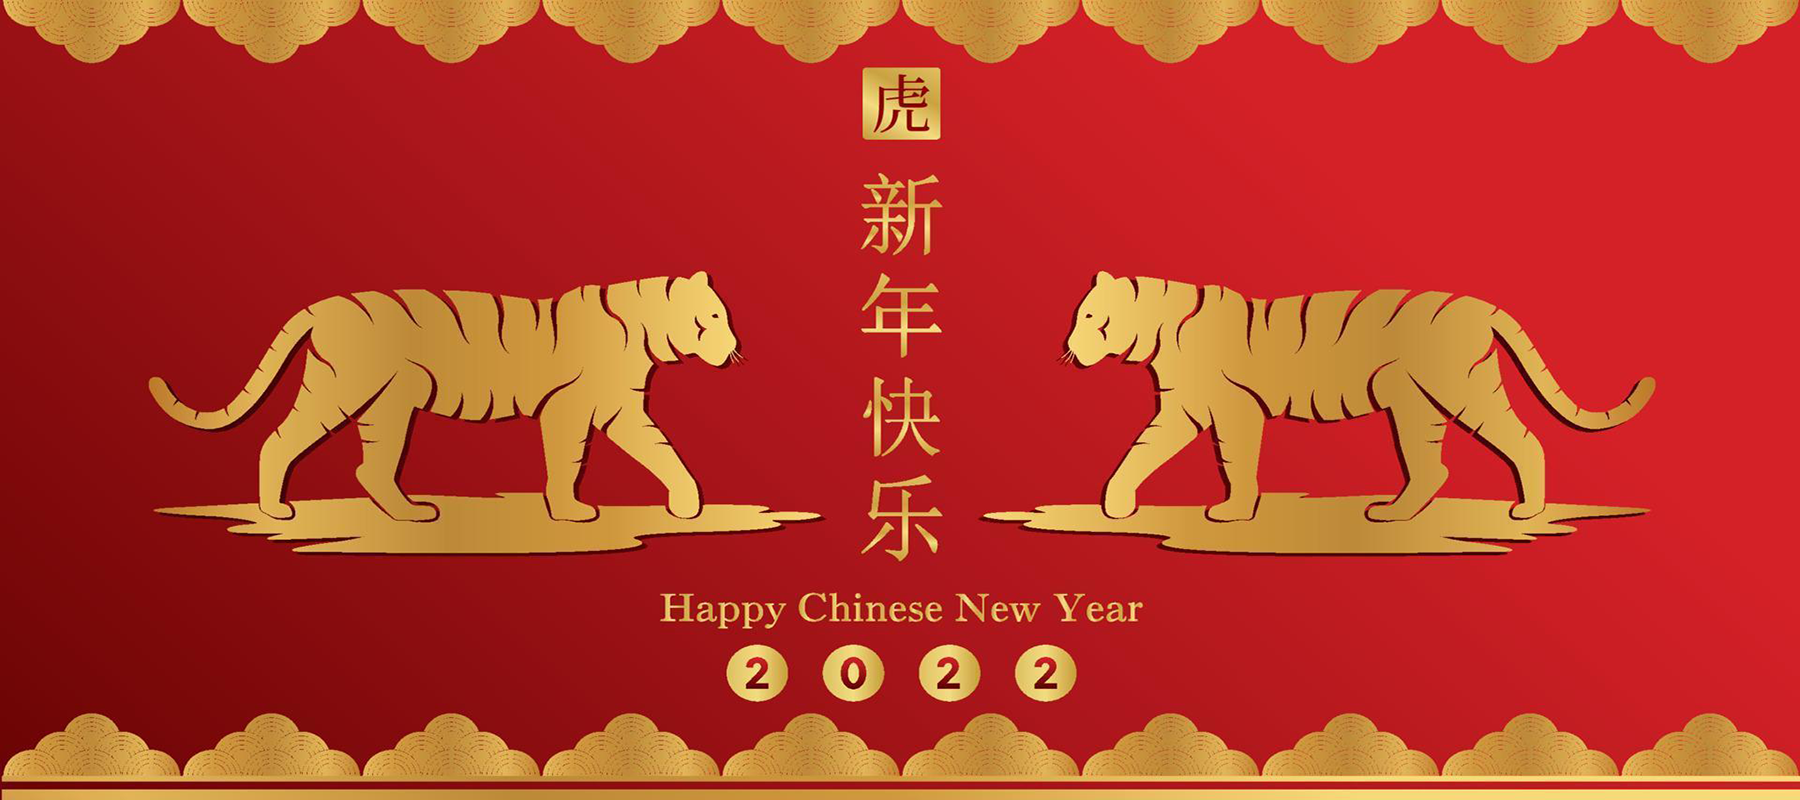 Happy New Year of the tiger 2022